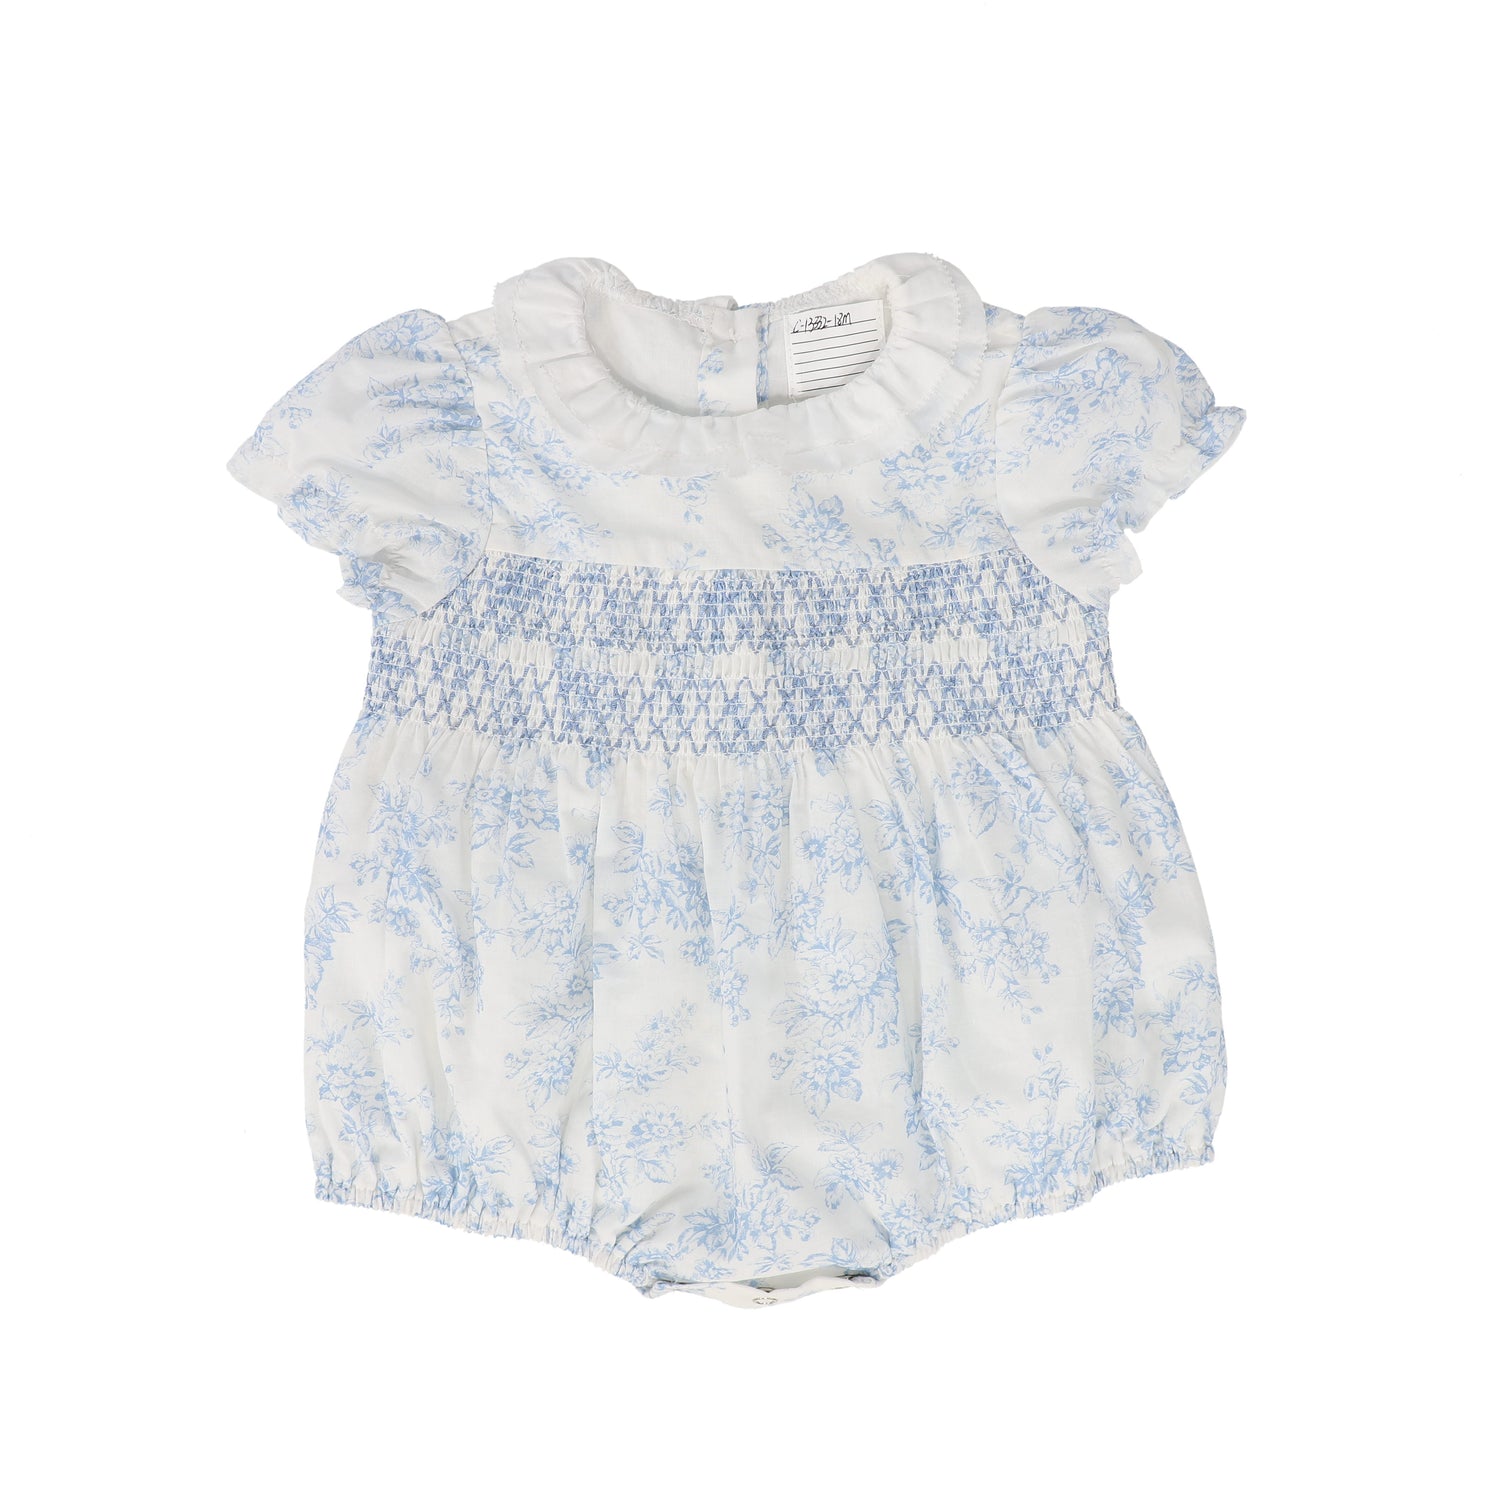 Bamboo Blue Floral Ruffle Collared Romper